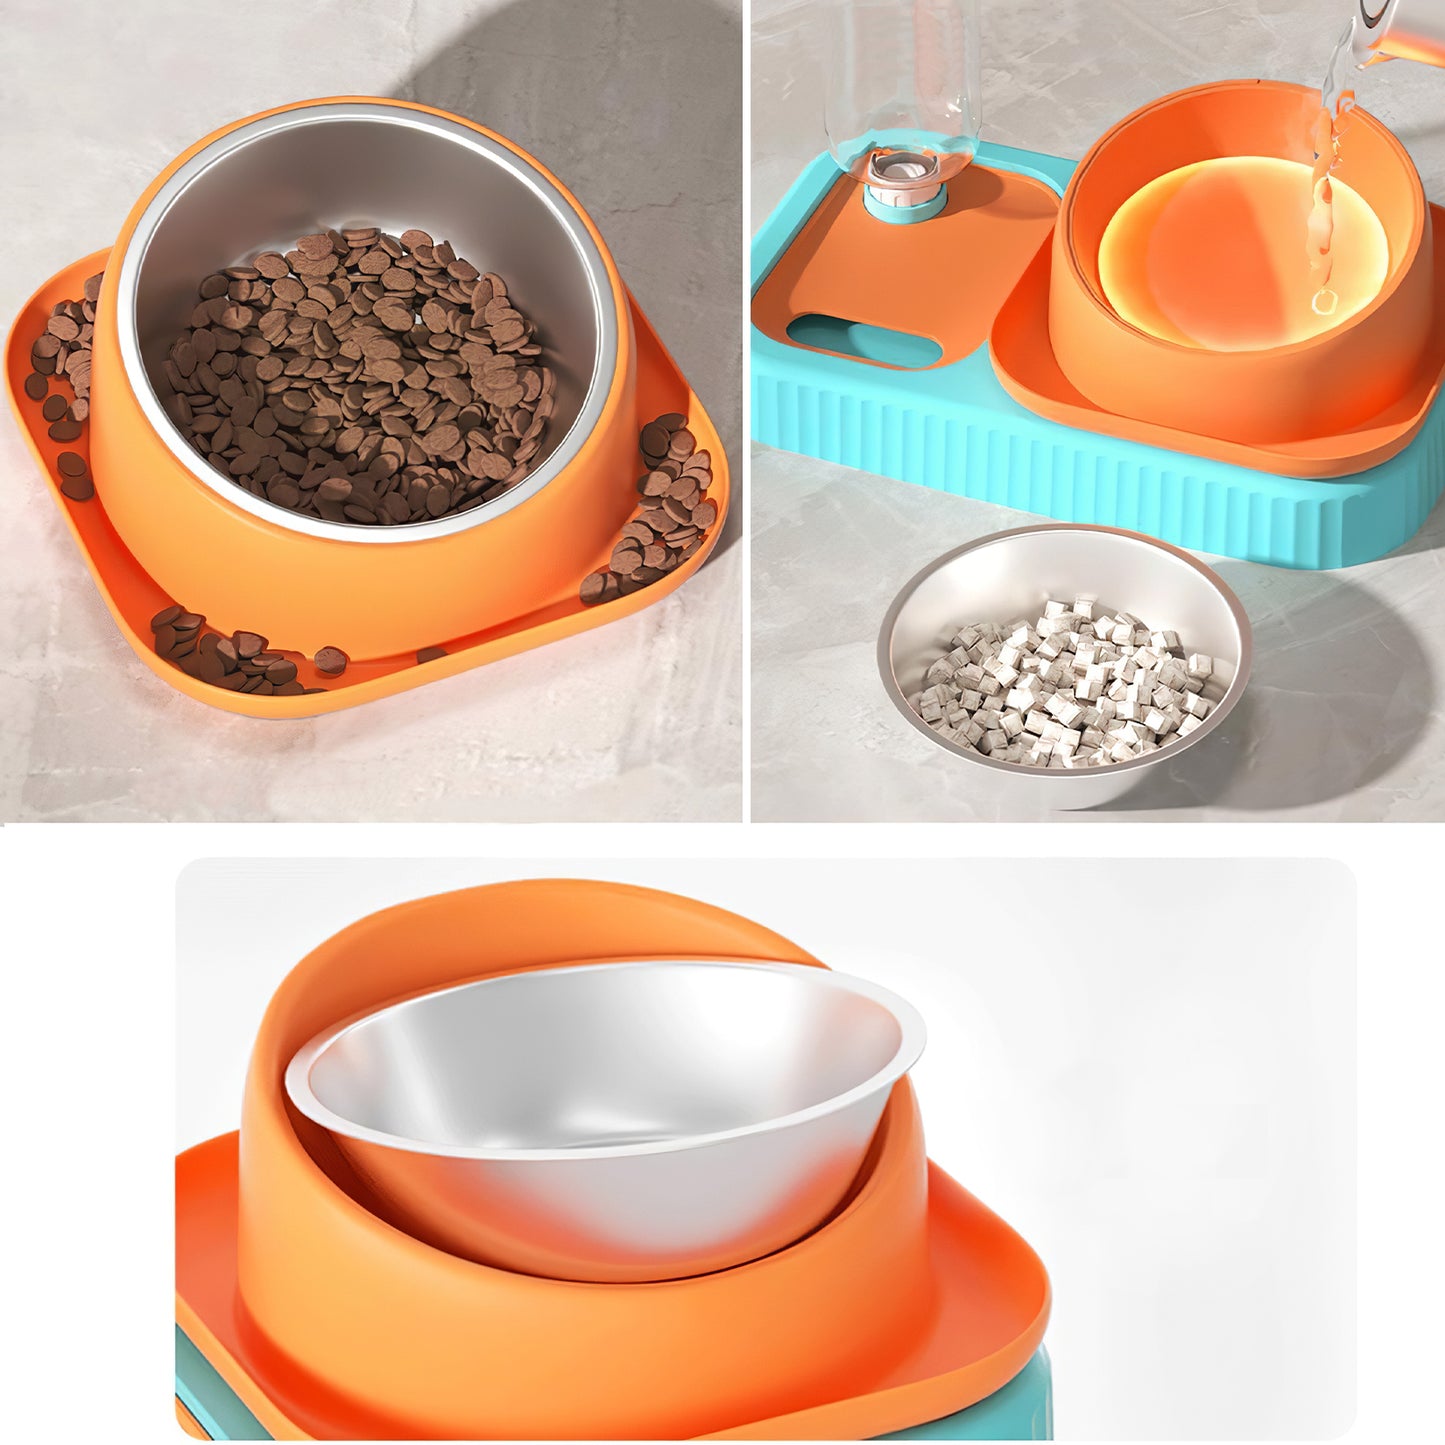 3 in 1 Pet Bowl: Stainless Steel Raised Cat Pet Food Bowls with Water Dispenser Slow Feeding Bowl for Cats Puppy Small Dogs